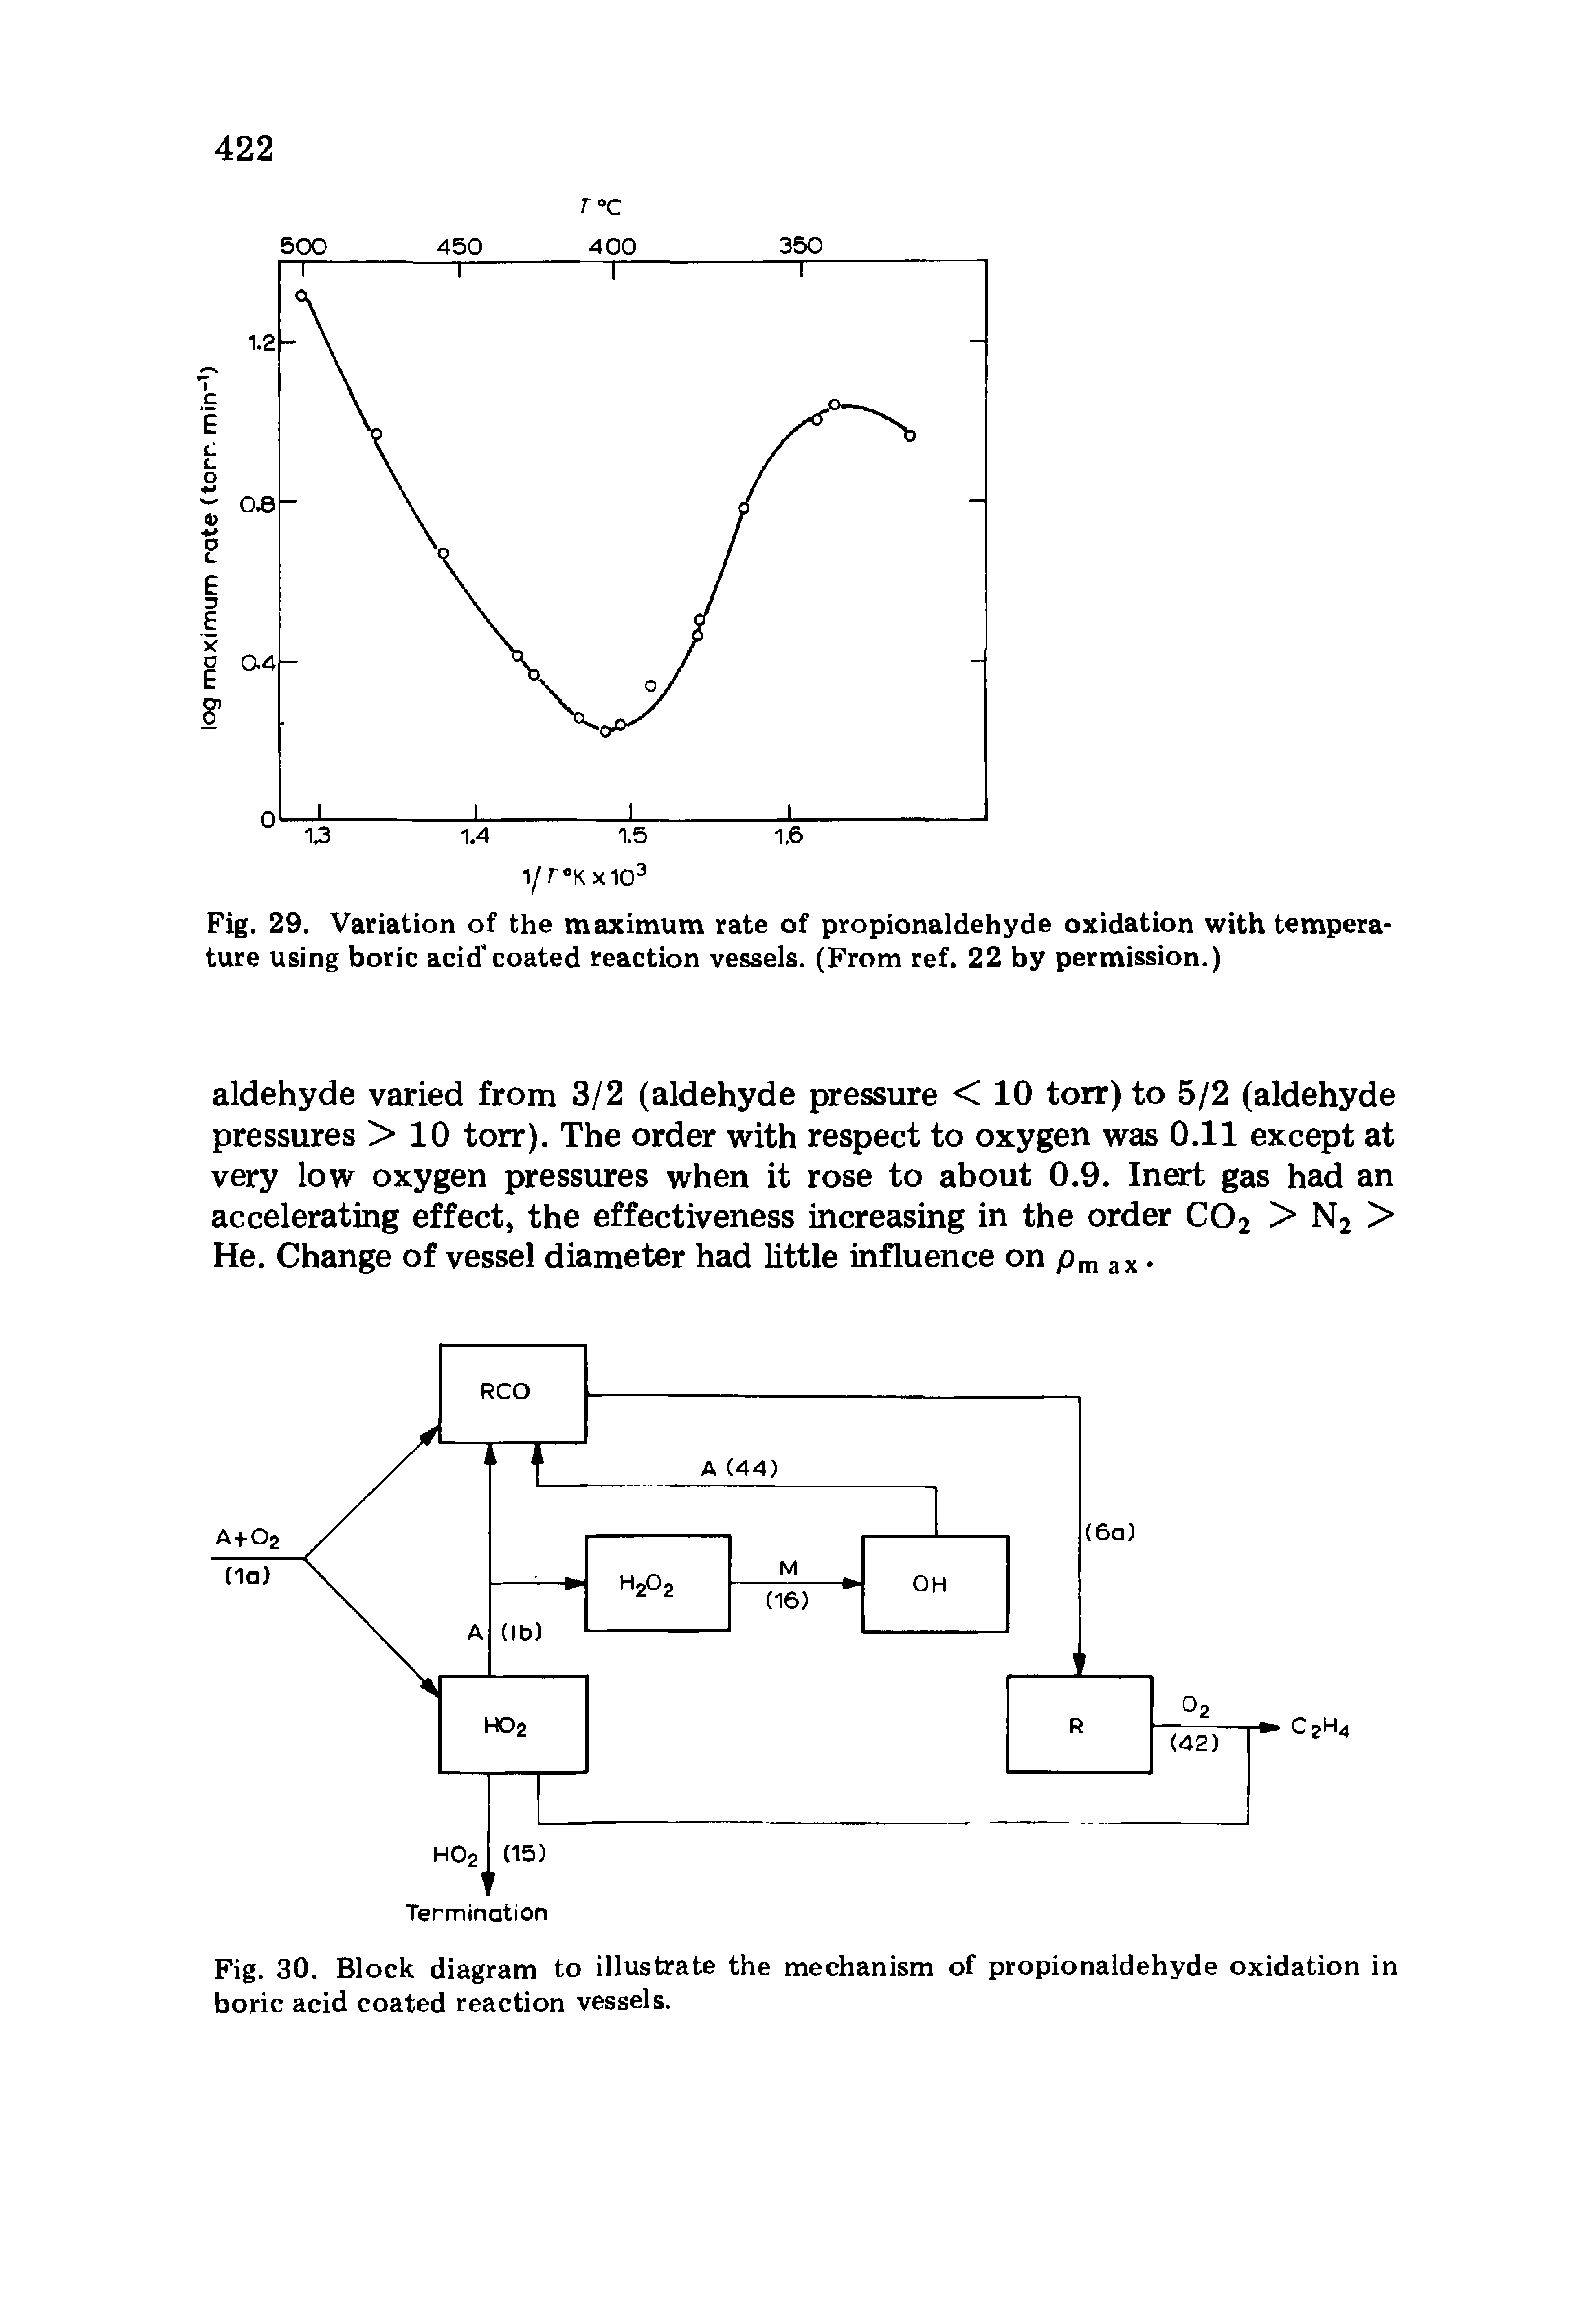 Fig. 29. Variation of the maximum rate of propionaldehyde oxidation with temperature using boric acid coated reaction vessels. (From ref. 22 by permission.)...